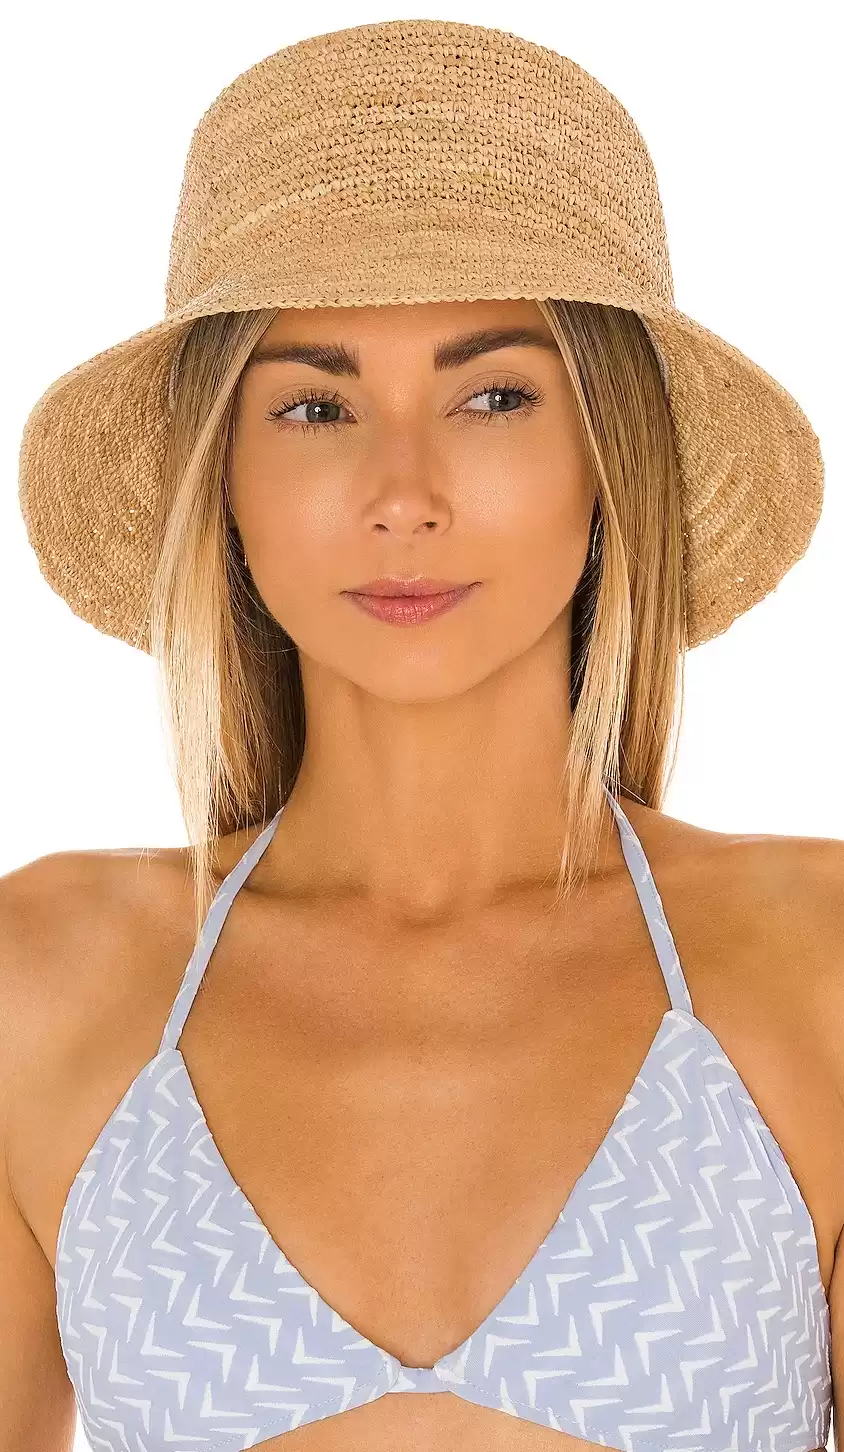 Travel outfit ideas for beach vacations. Style with the L space hat. 